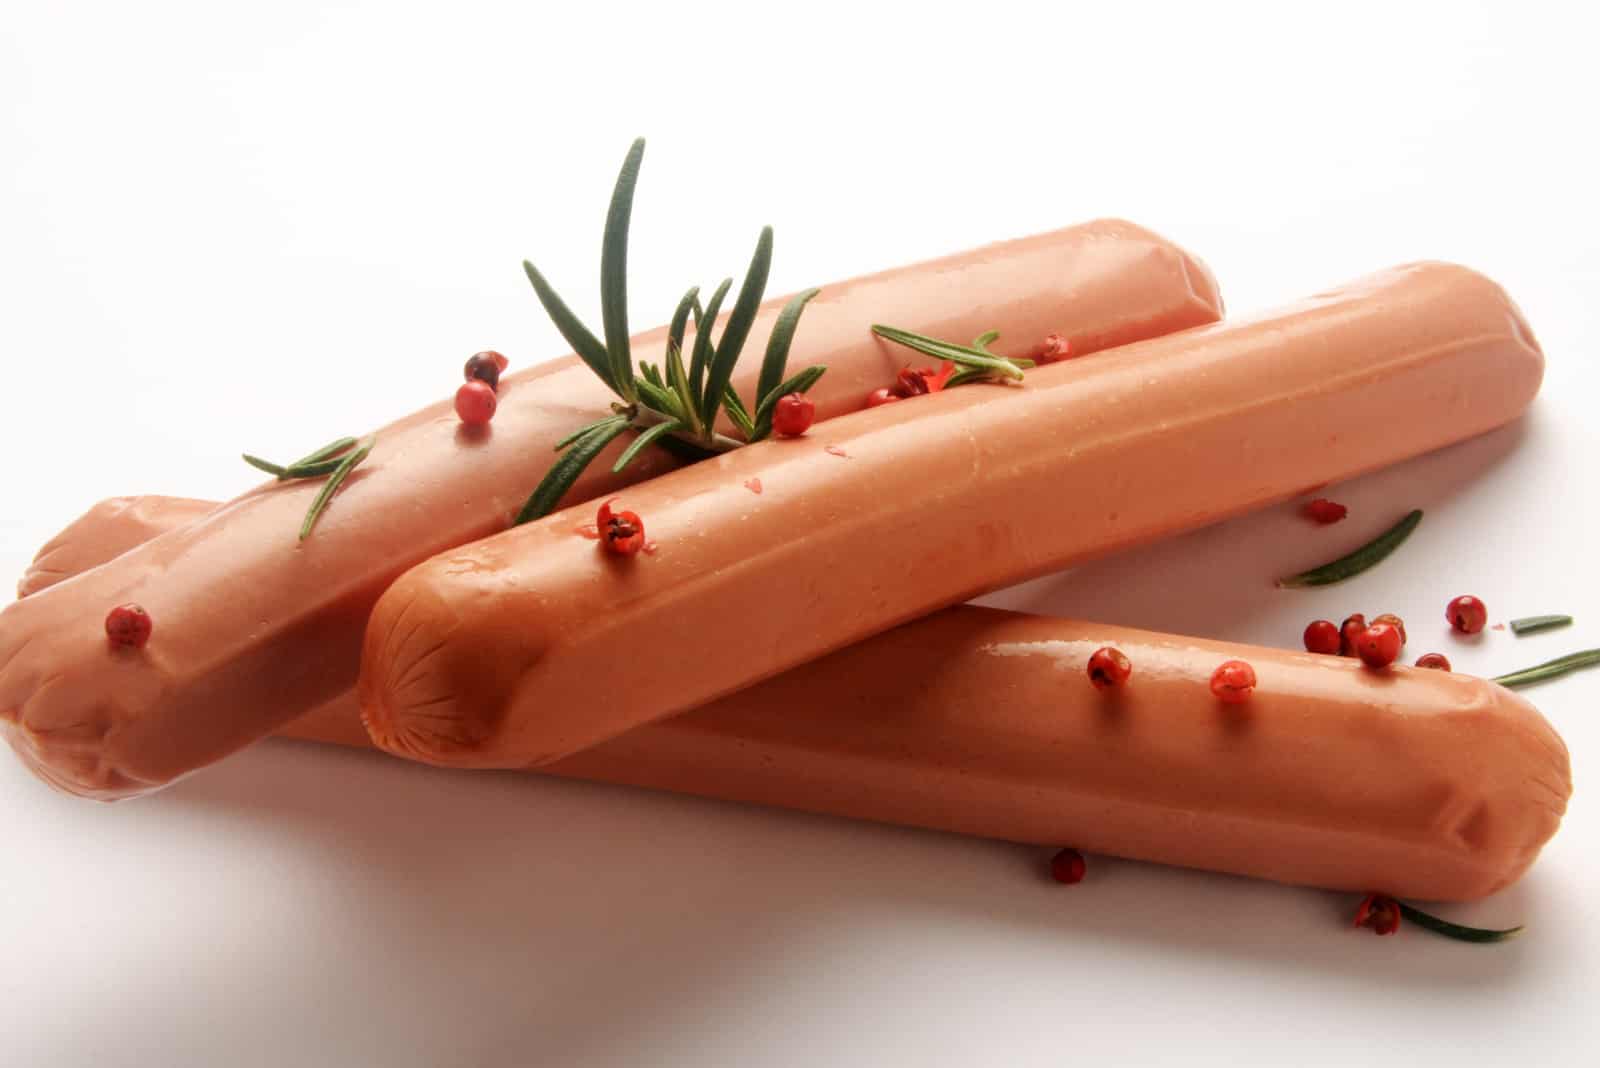 Can Dogs Eat Vienna Sausages? Dog Health And Human Food